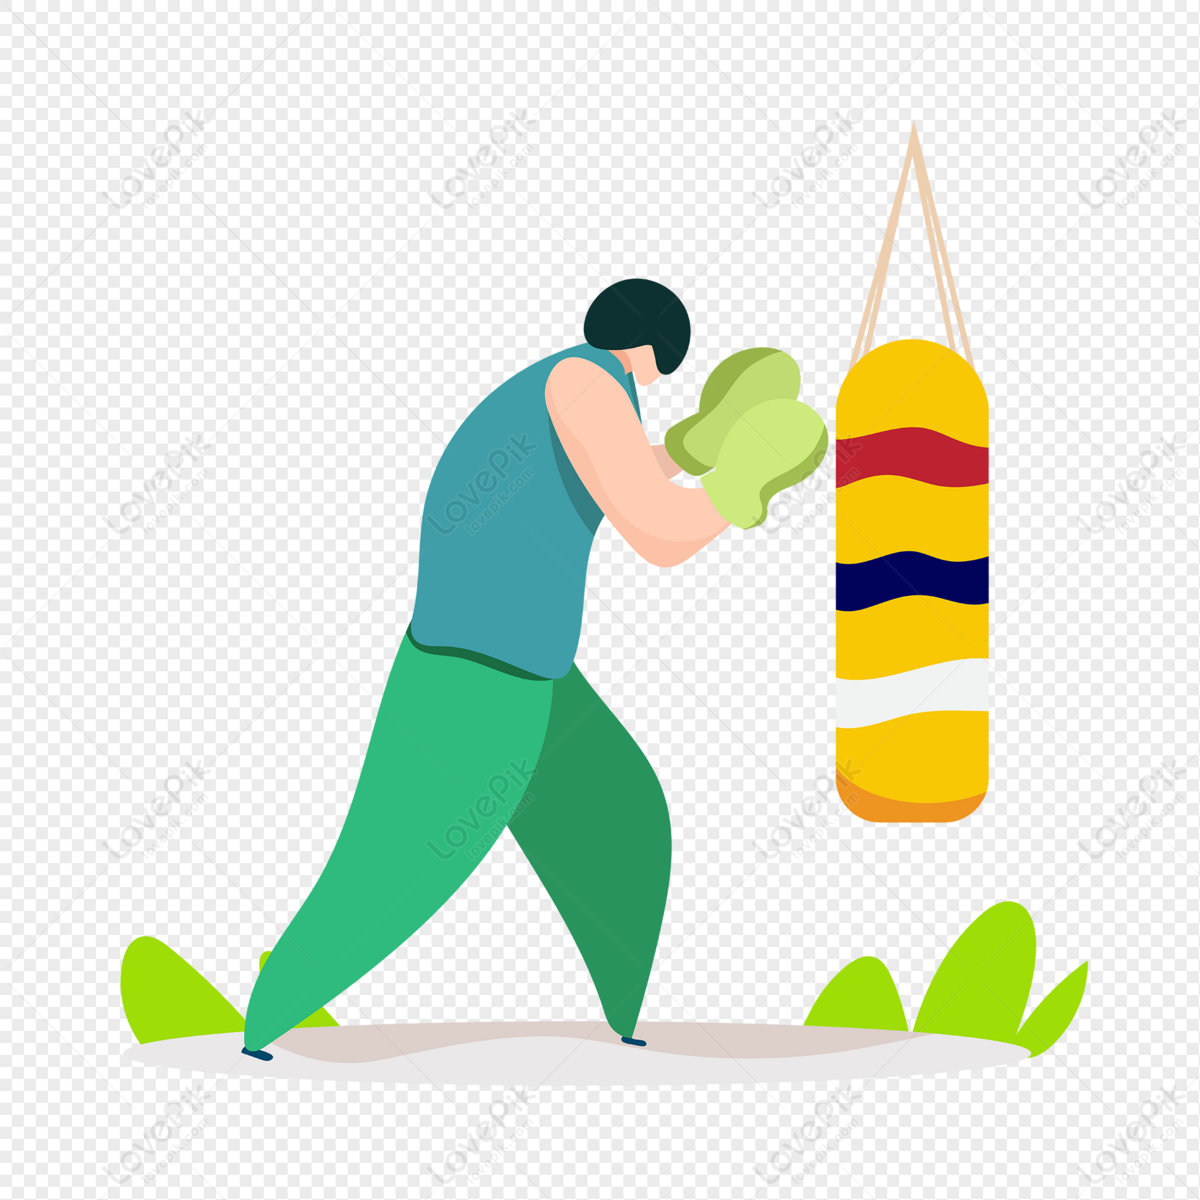 Boxing Match Free PNG And Clipart Image For Free Download